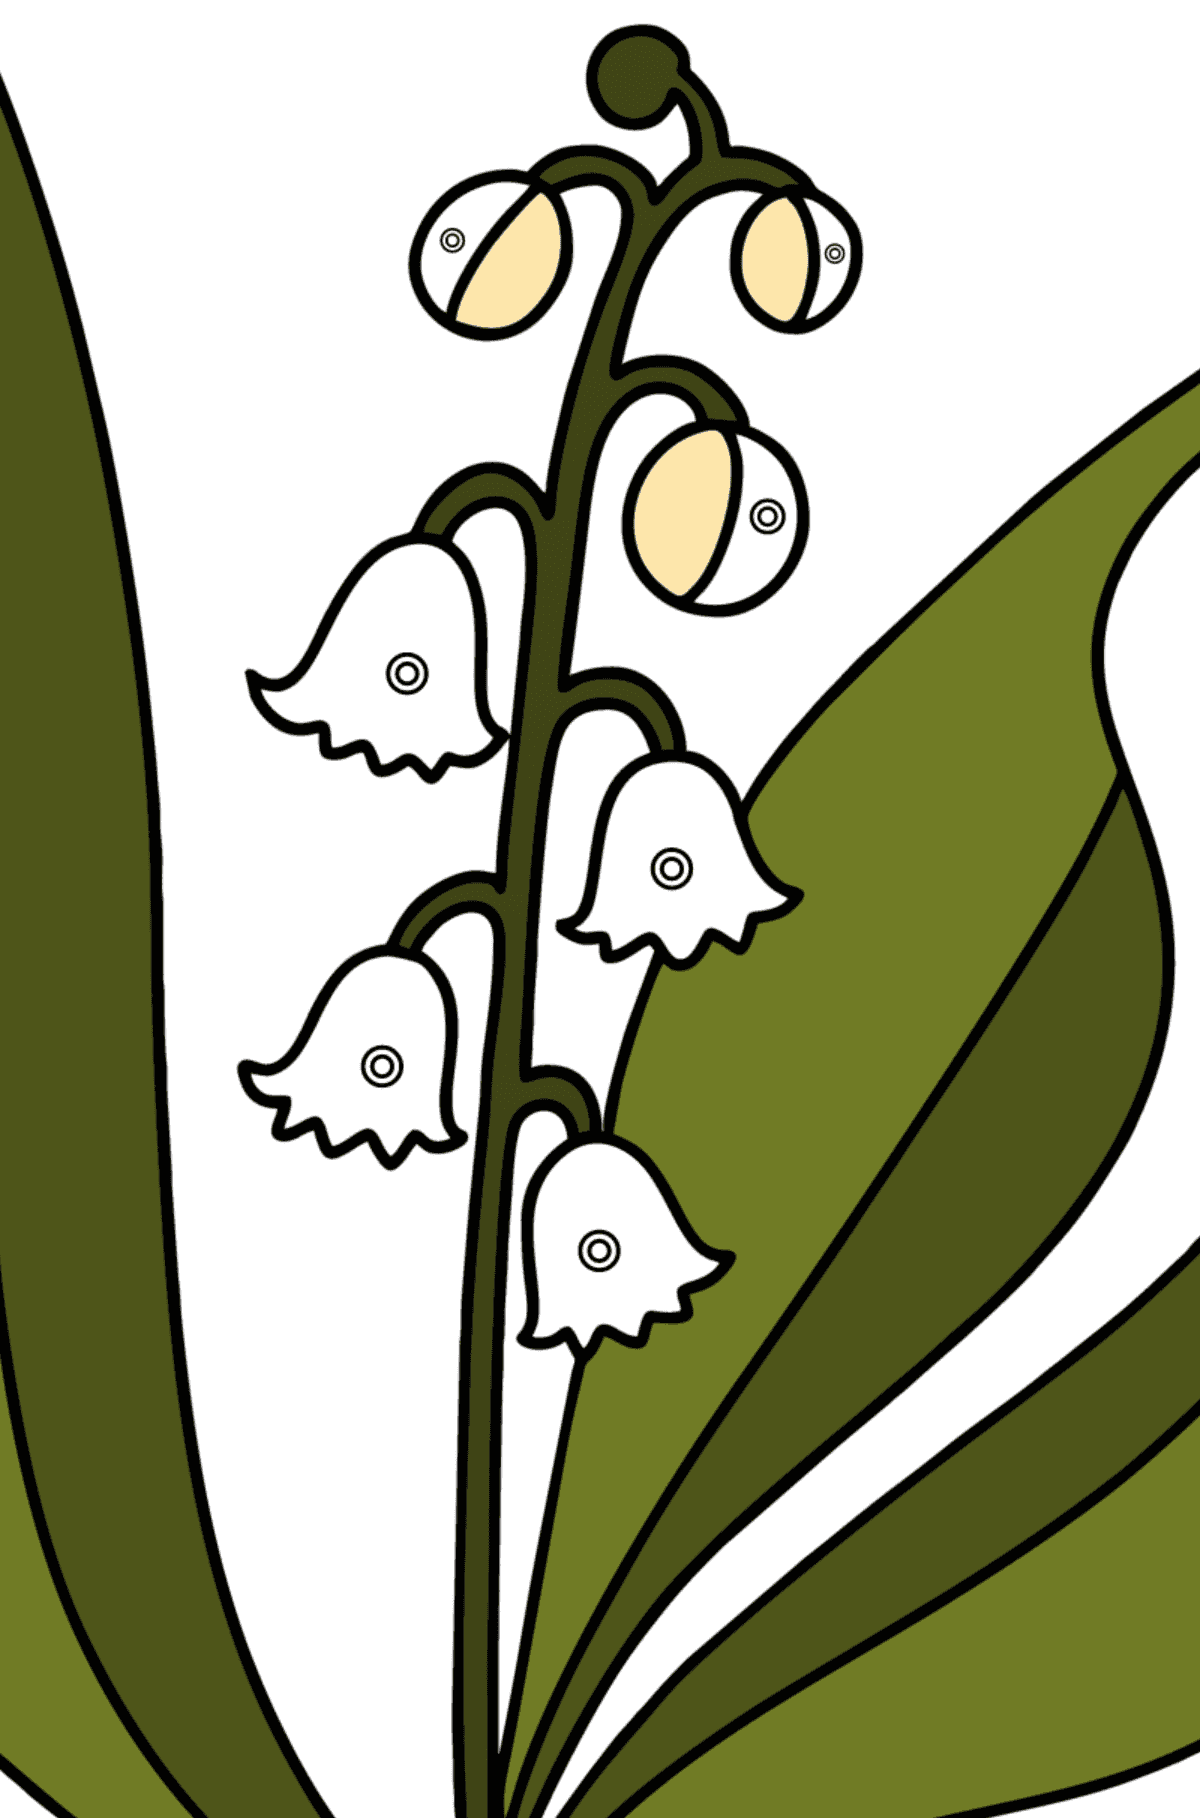 Lily of valley coloring page - Coloring by Geometric Shapes for Kids